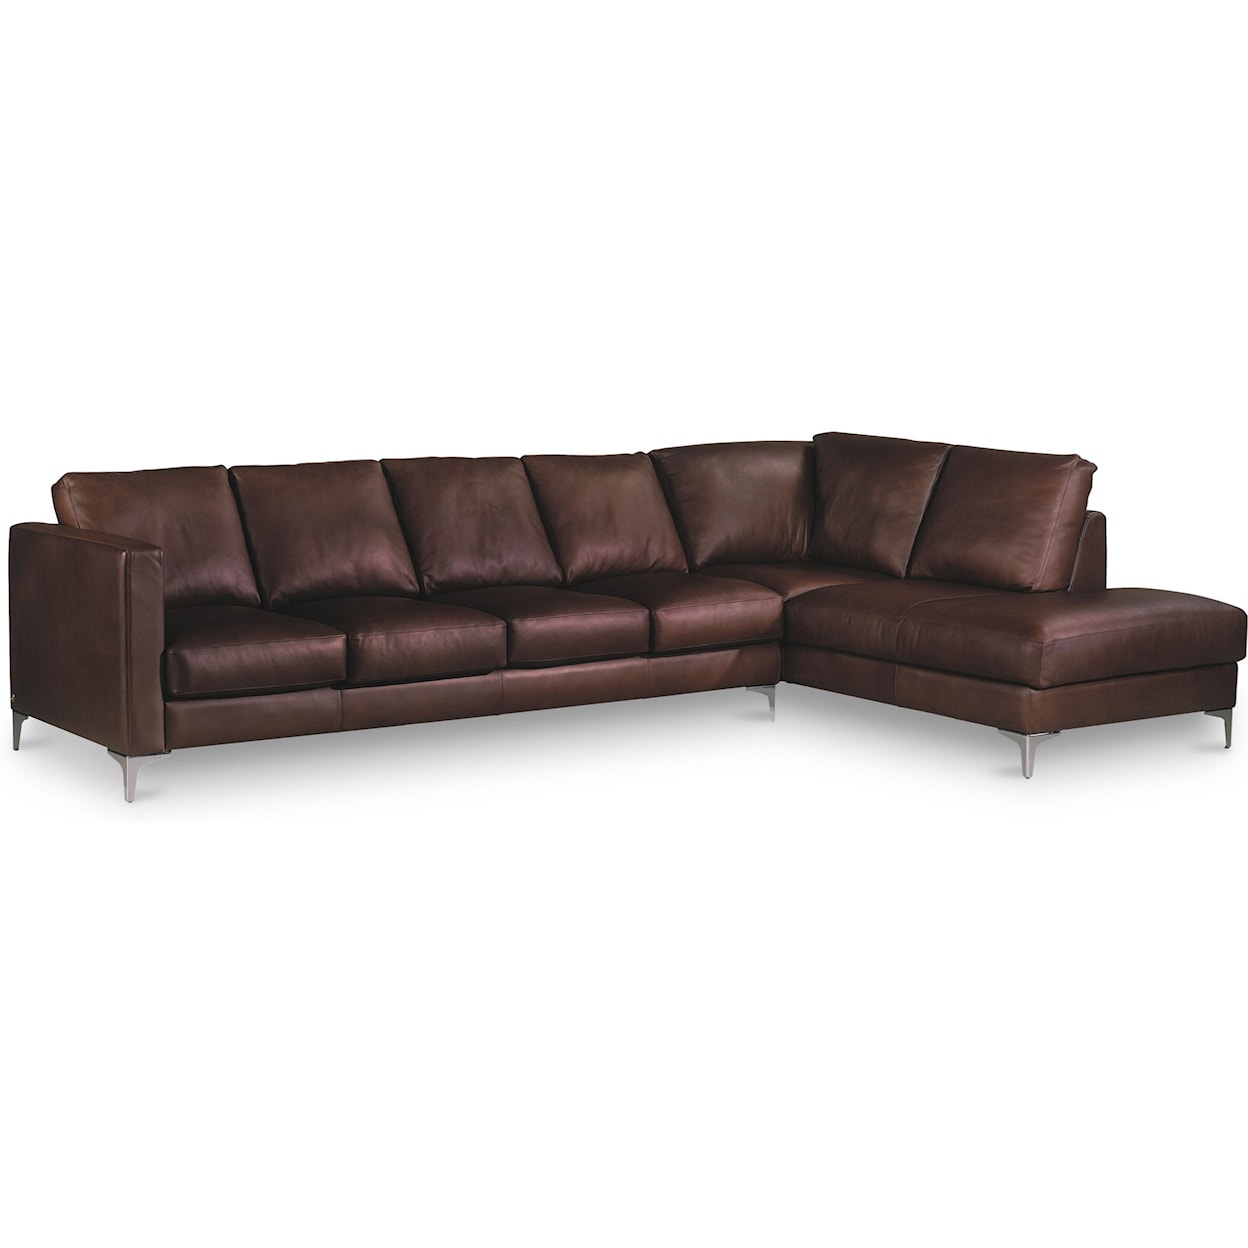 American Leather Kendall 5-Seat Sectional w/ Left Arm Sitting Chaise